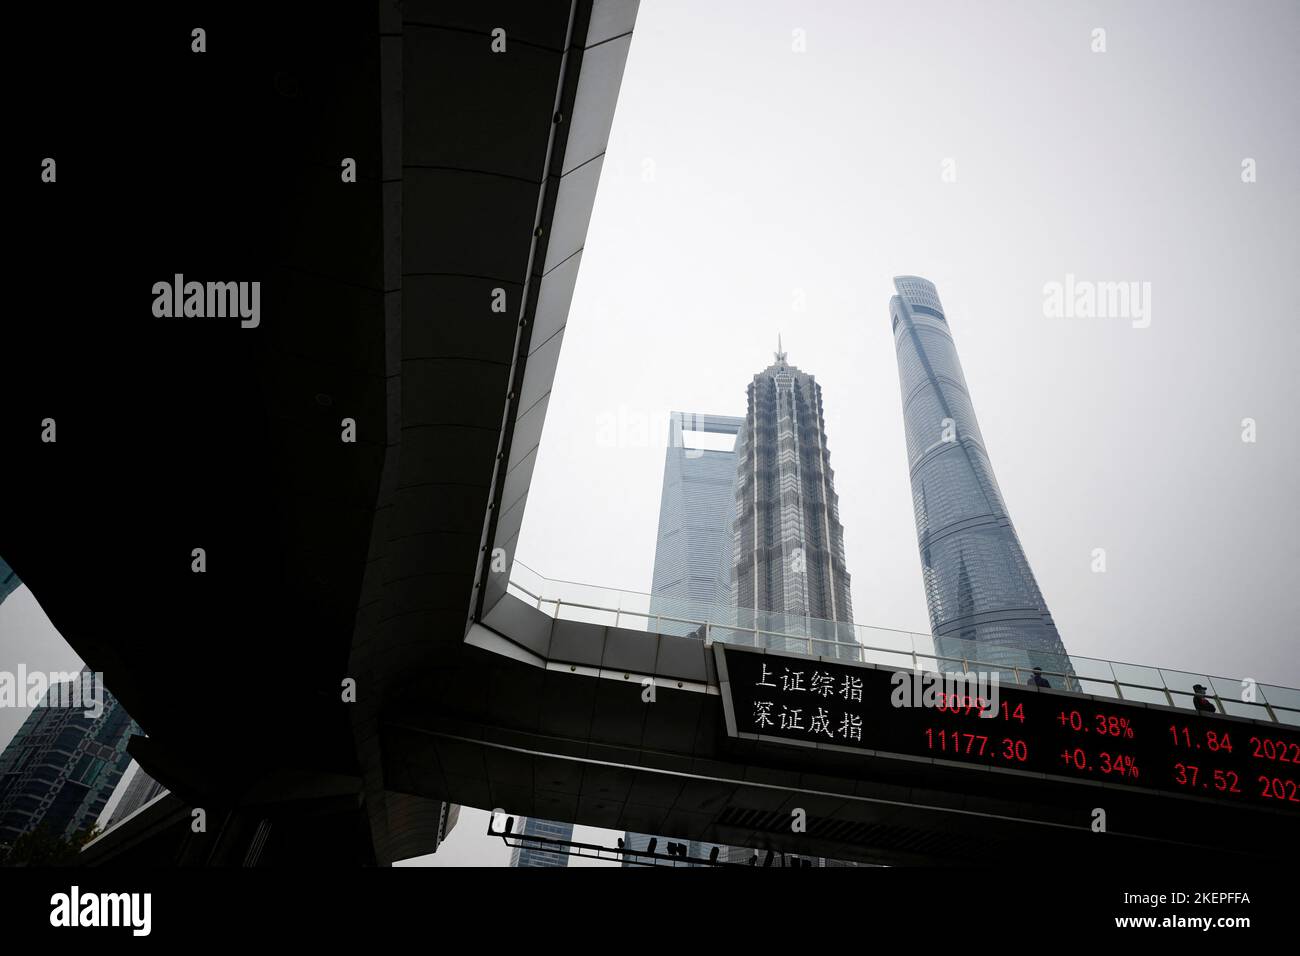 An electronic board shows Shanghai and Shenzhen stock indexes, at the Lujiazui financial district, following the coronavirus disease (COVID-19) outbreak, in Shanghai, China November 14, 2022. REUTERS/Aly Song Stock Photo